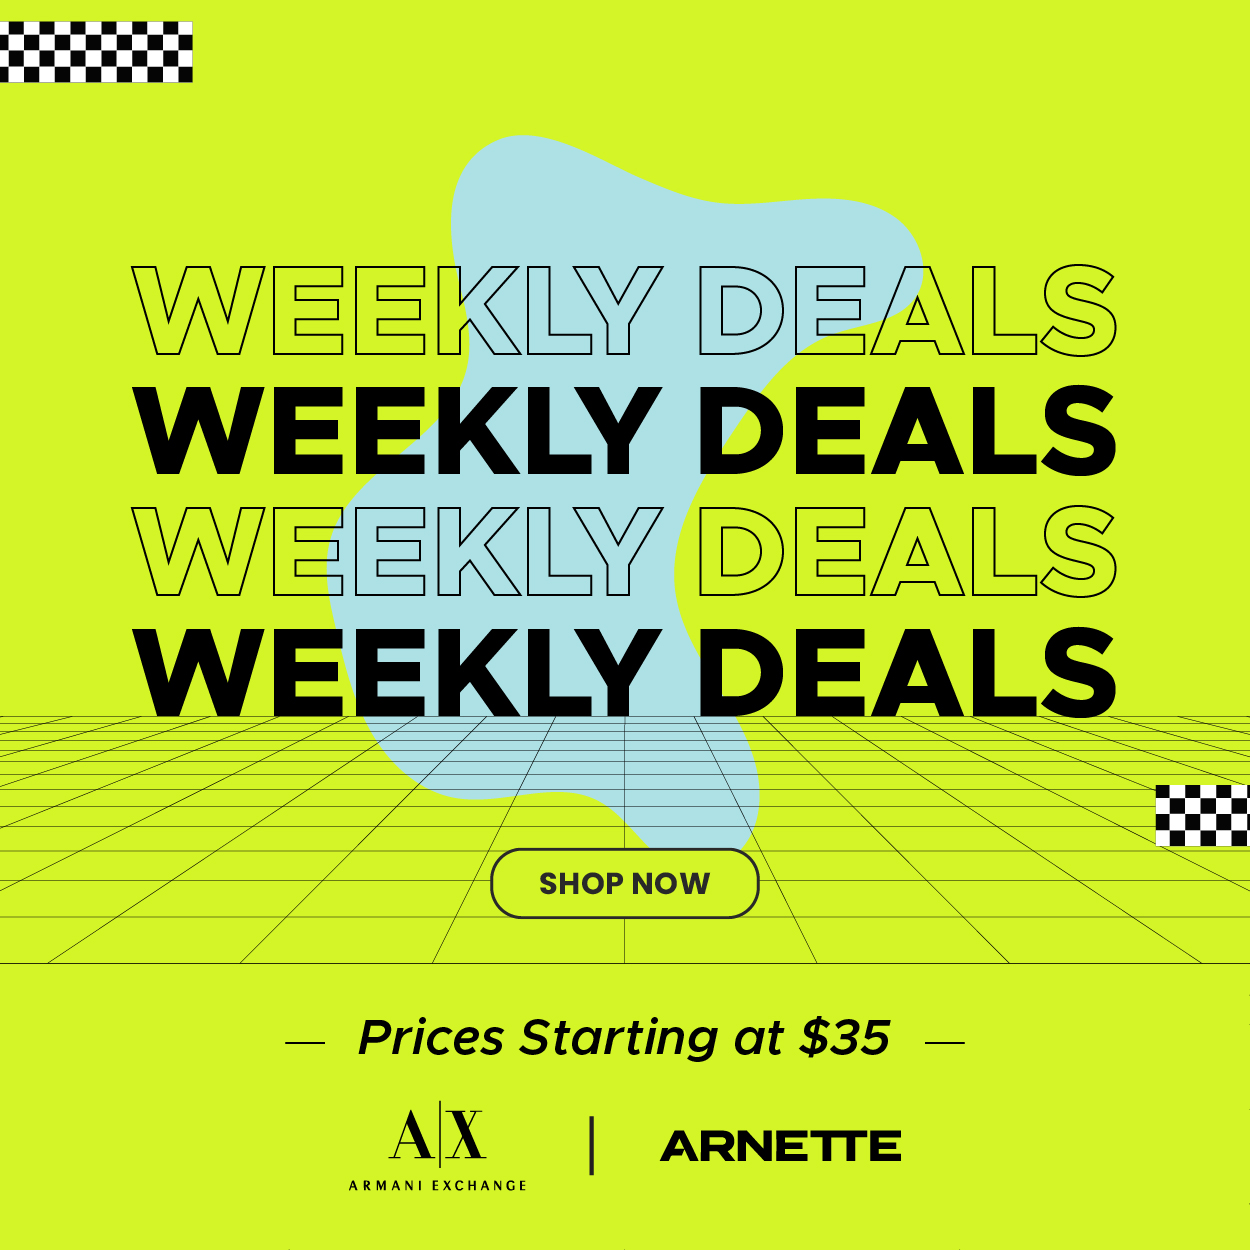 Weekly Deal: A|X & Arnette